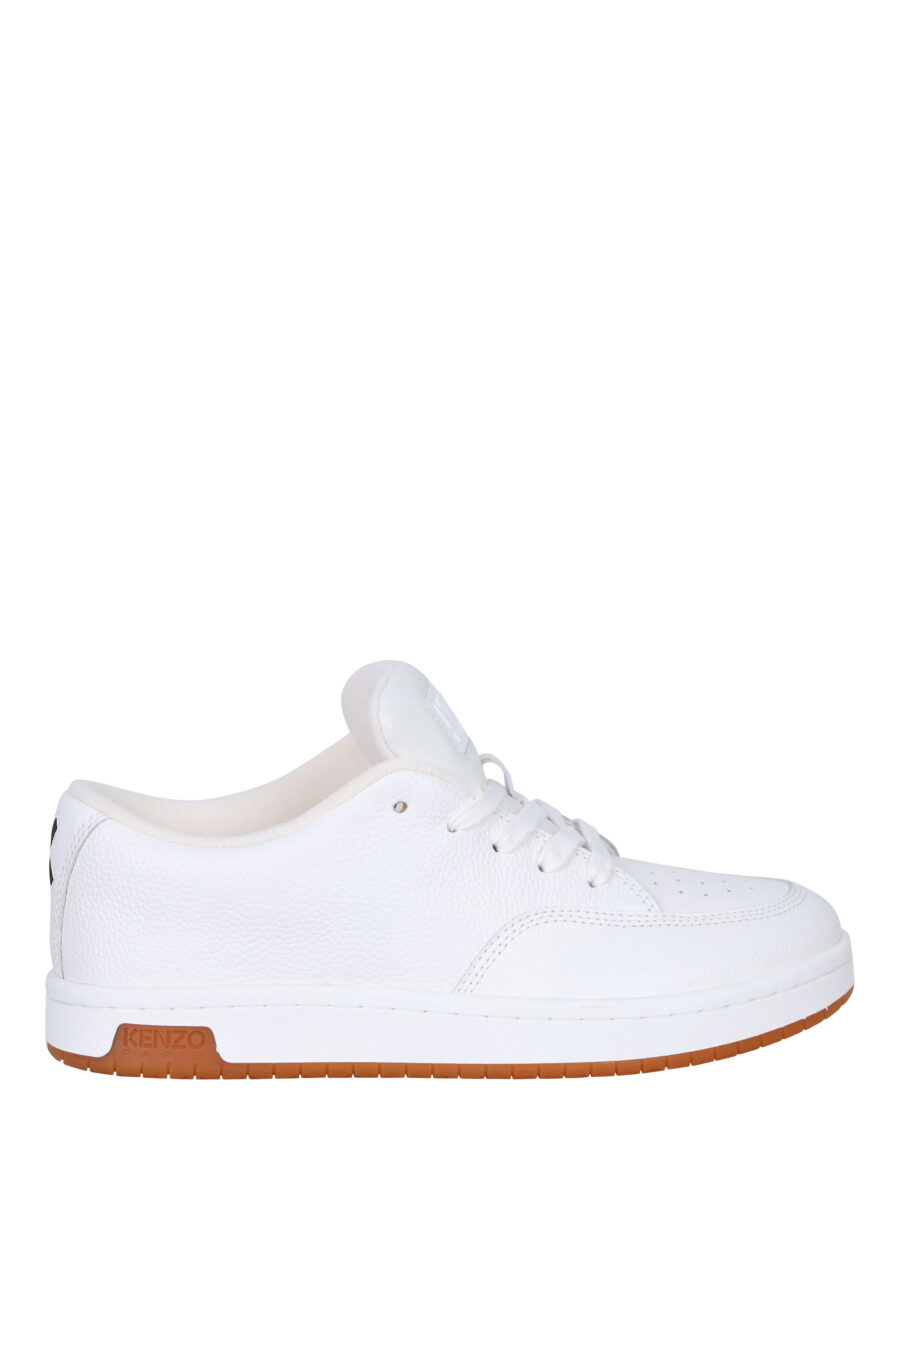 White trainers "kenzo dome" with minilogo and brown sole - 3612230556089